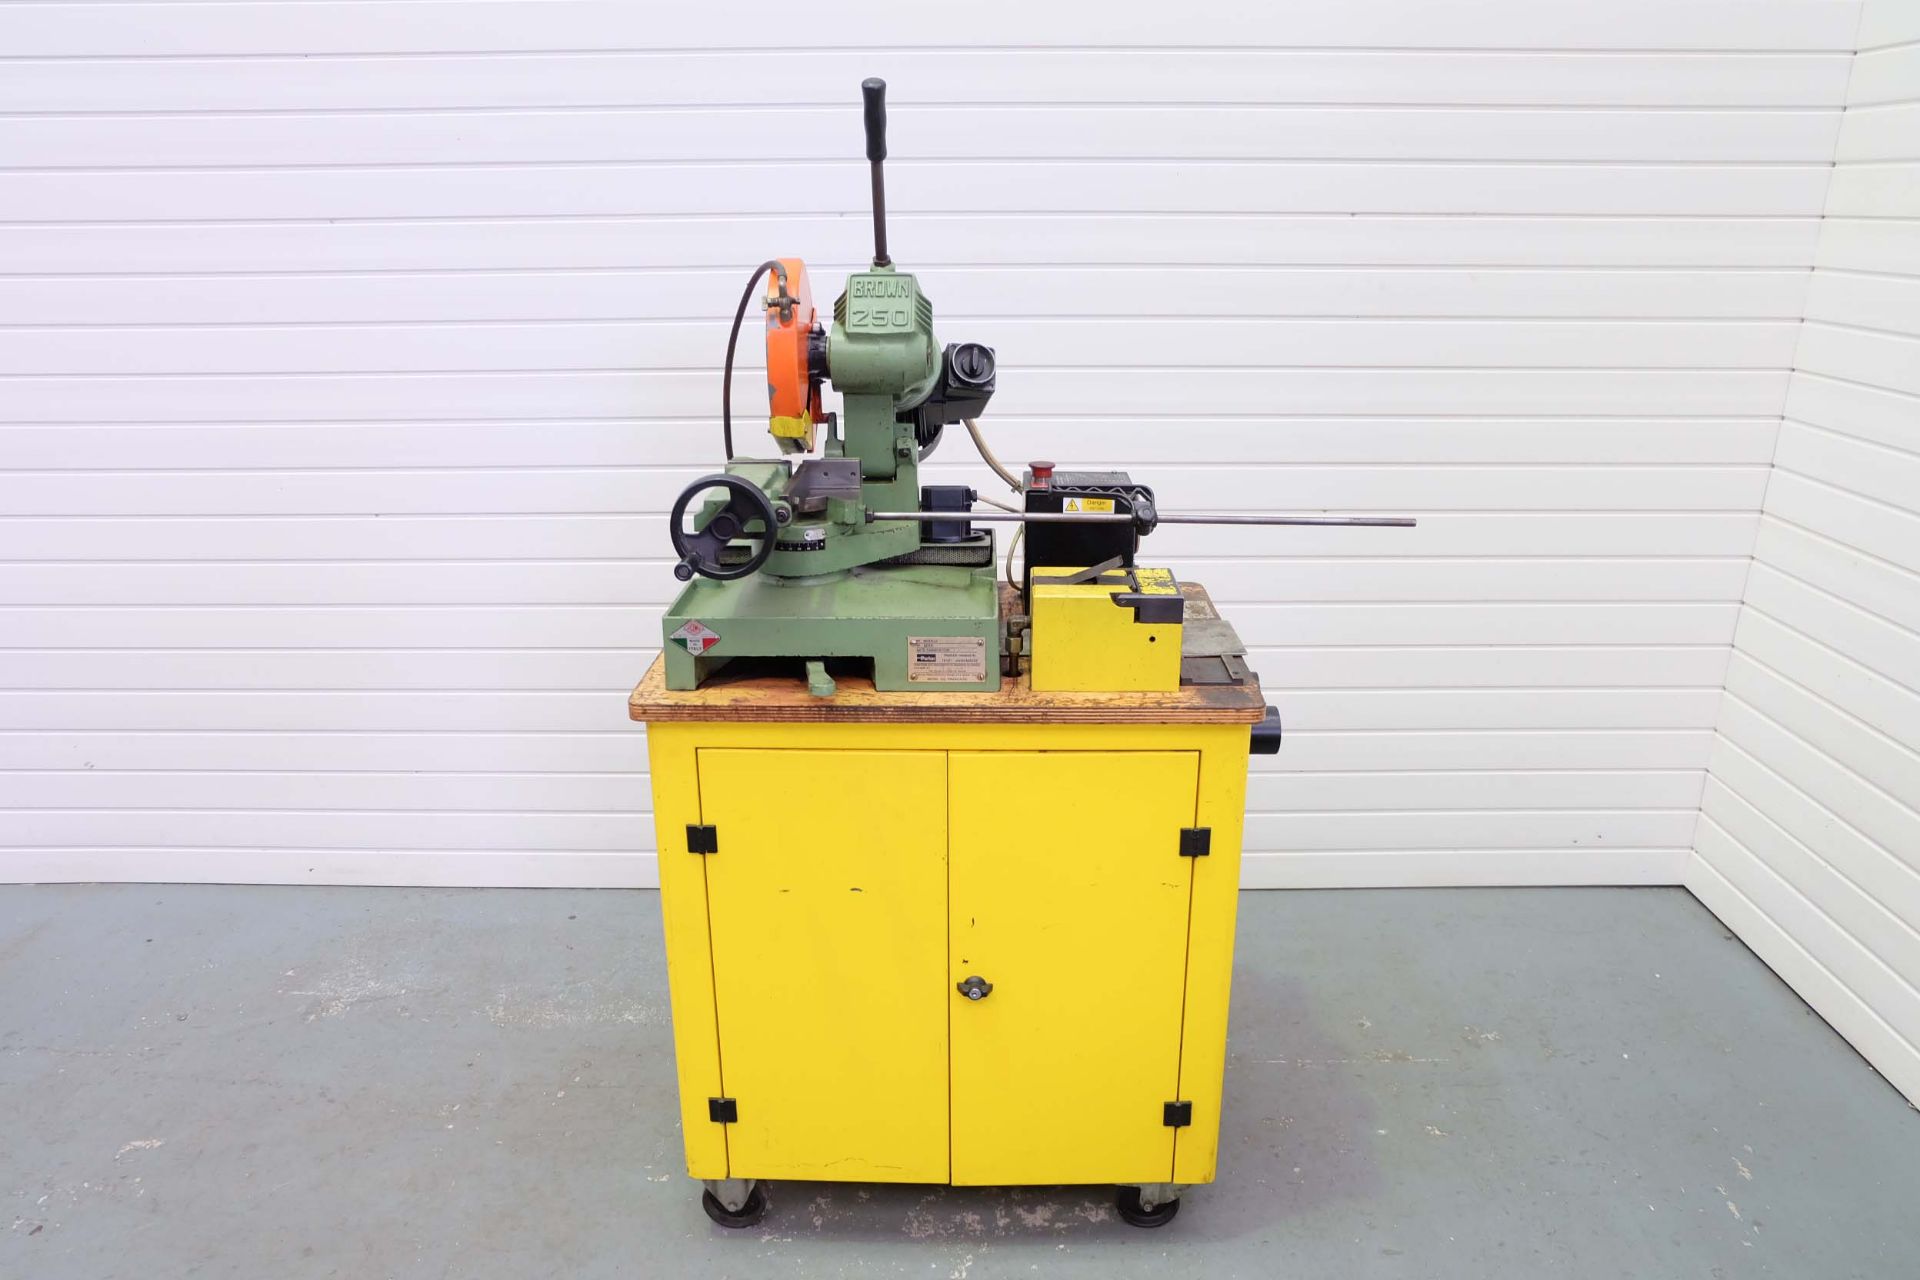 Pedrazzoli Brown 250 250 Pull Down Circular Saw. On Mobile Cabinet with Deburring and Hydraulic Powe